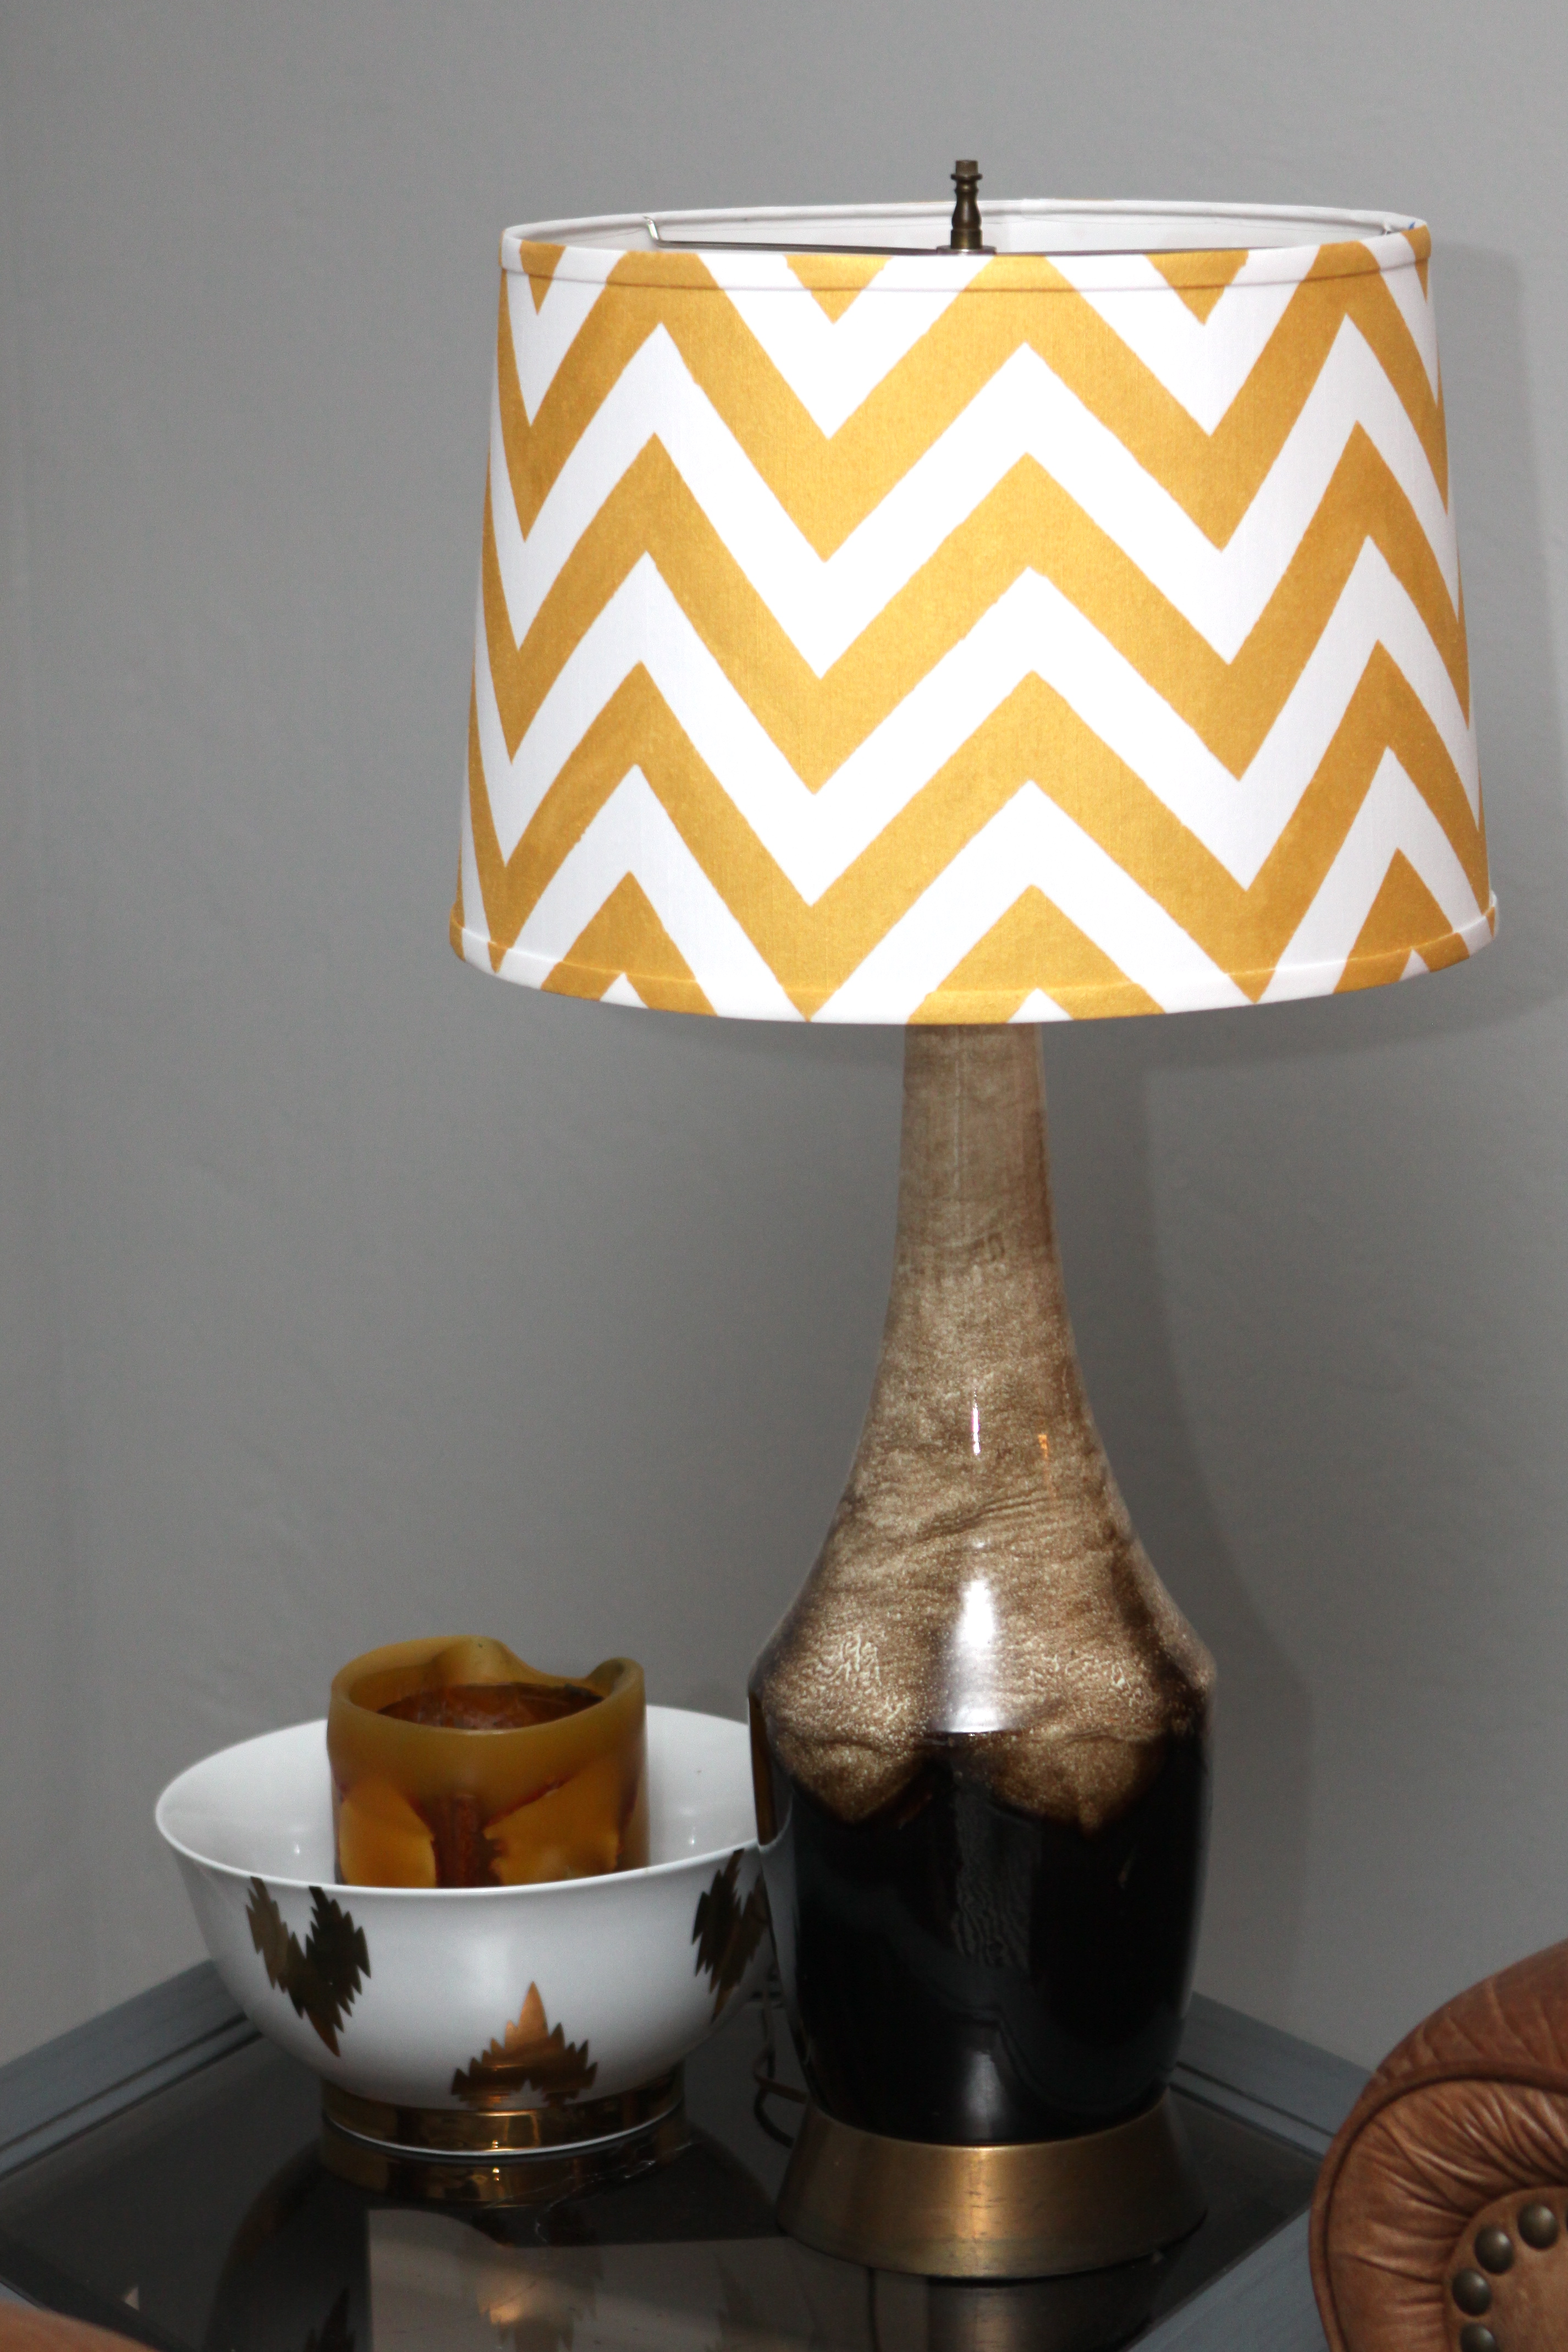 23 Ways To Diy And Redo A Lampshade, Easy Diy Lampshade Cover